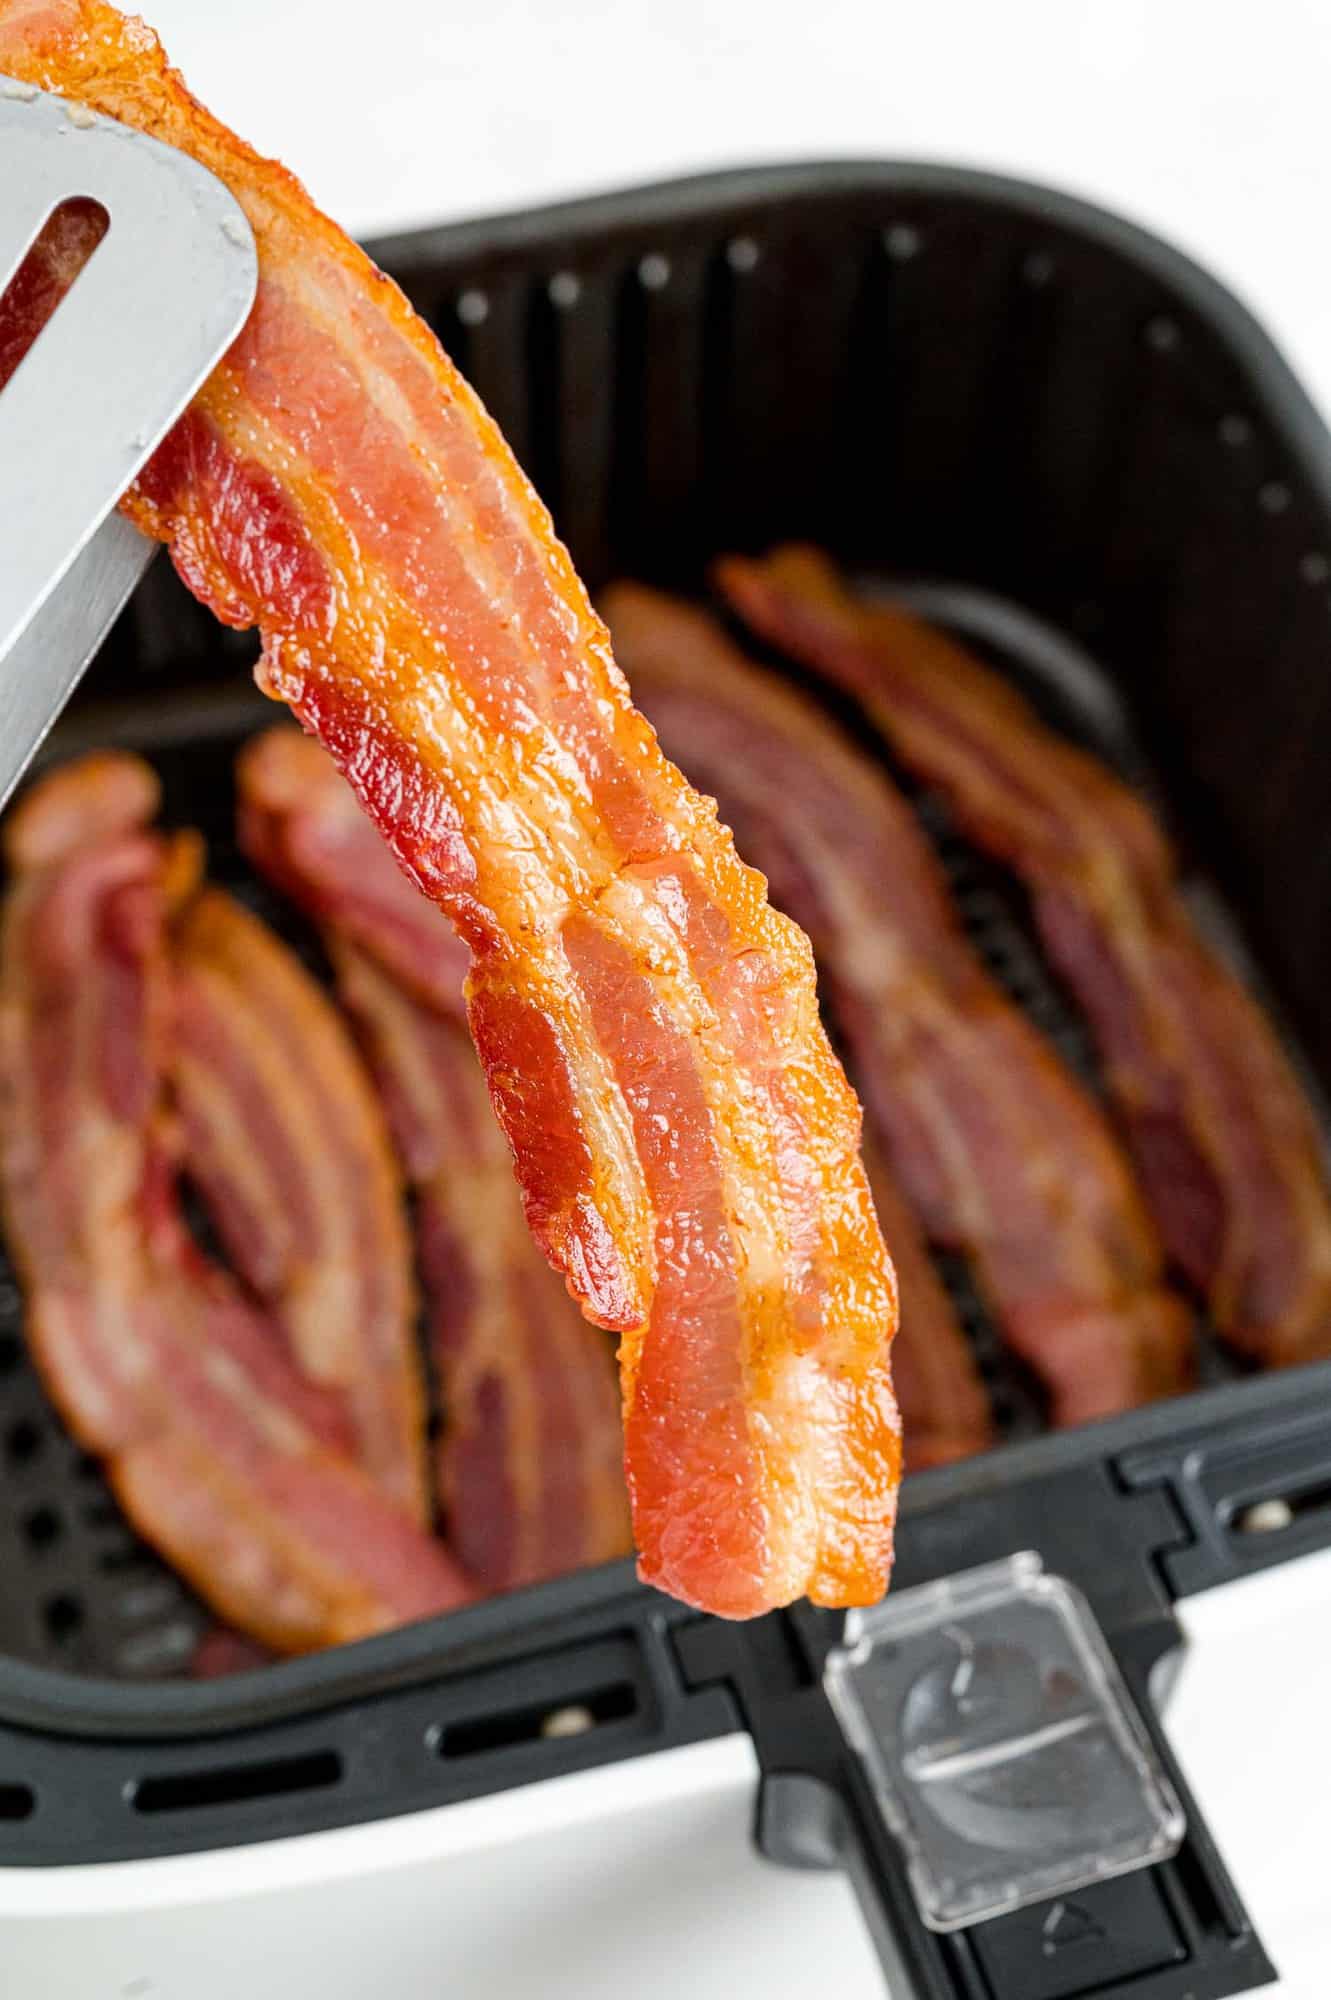 Cooked bacon being taken out of an air fryer.